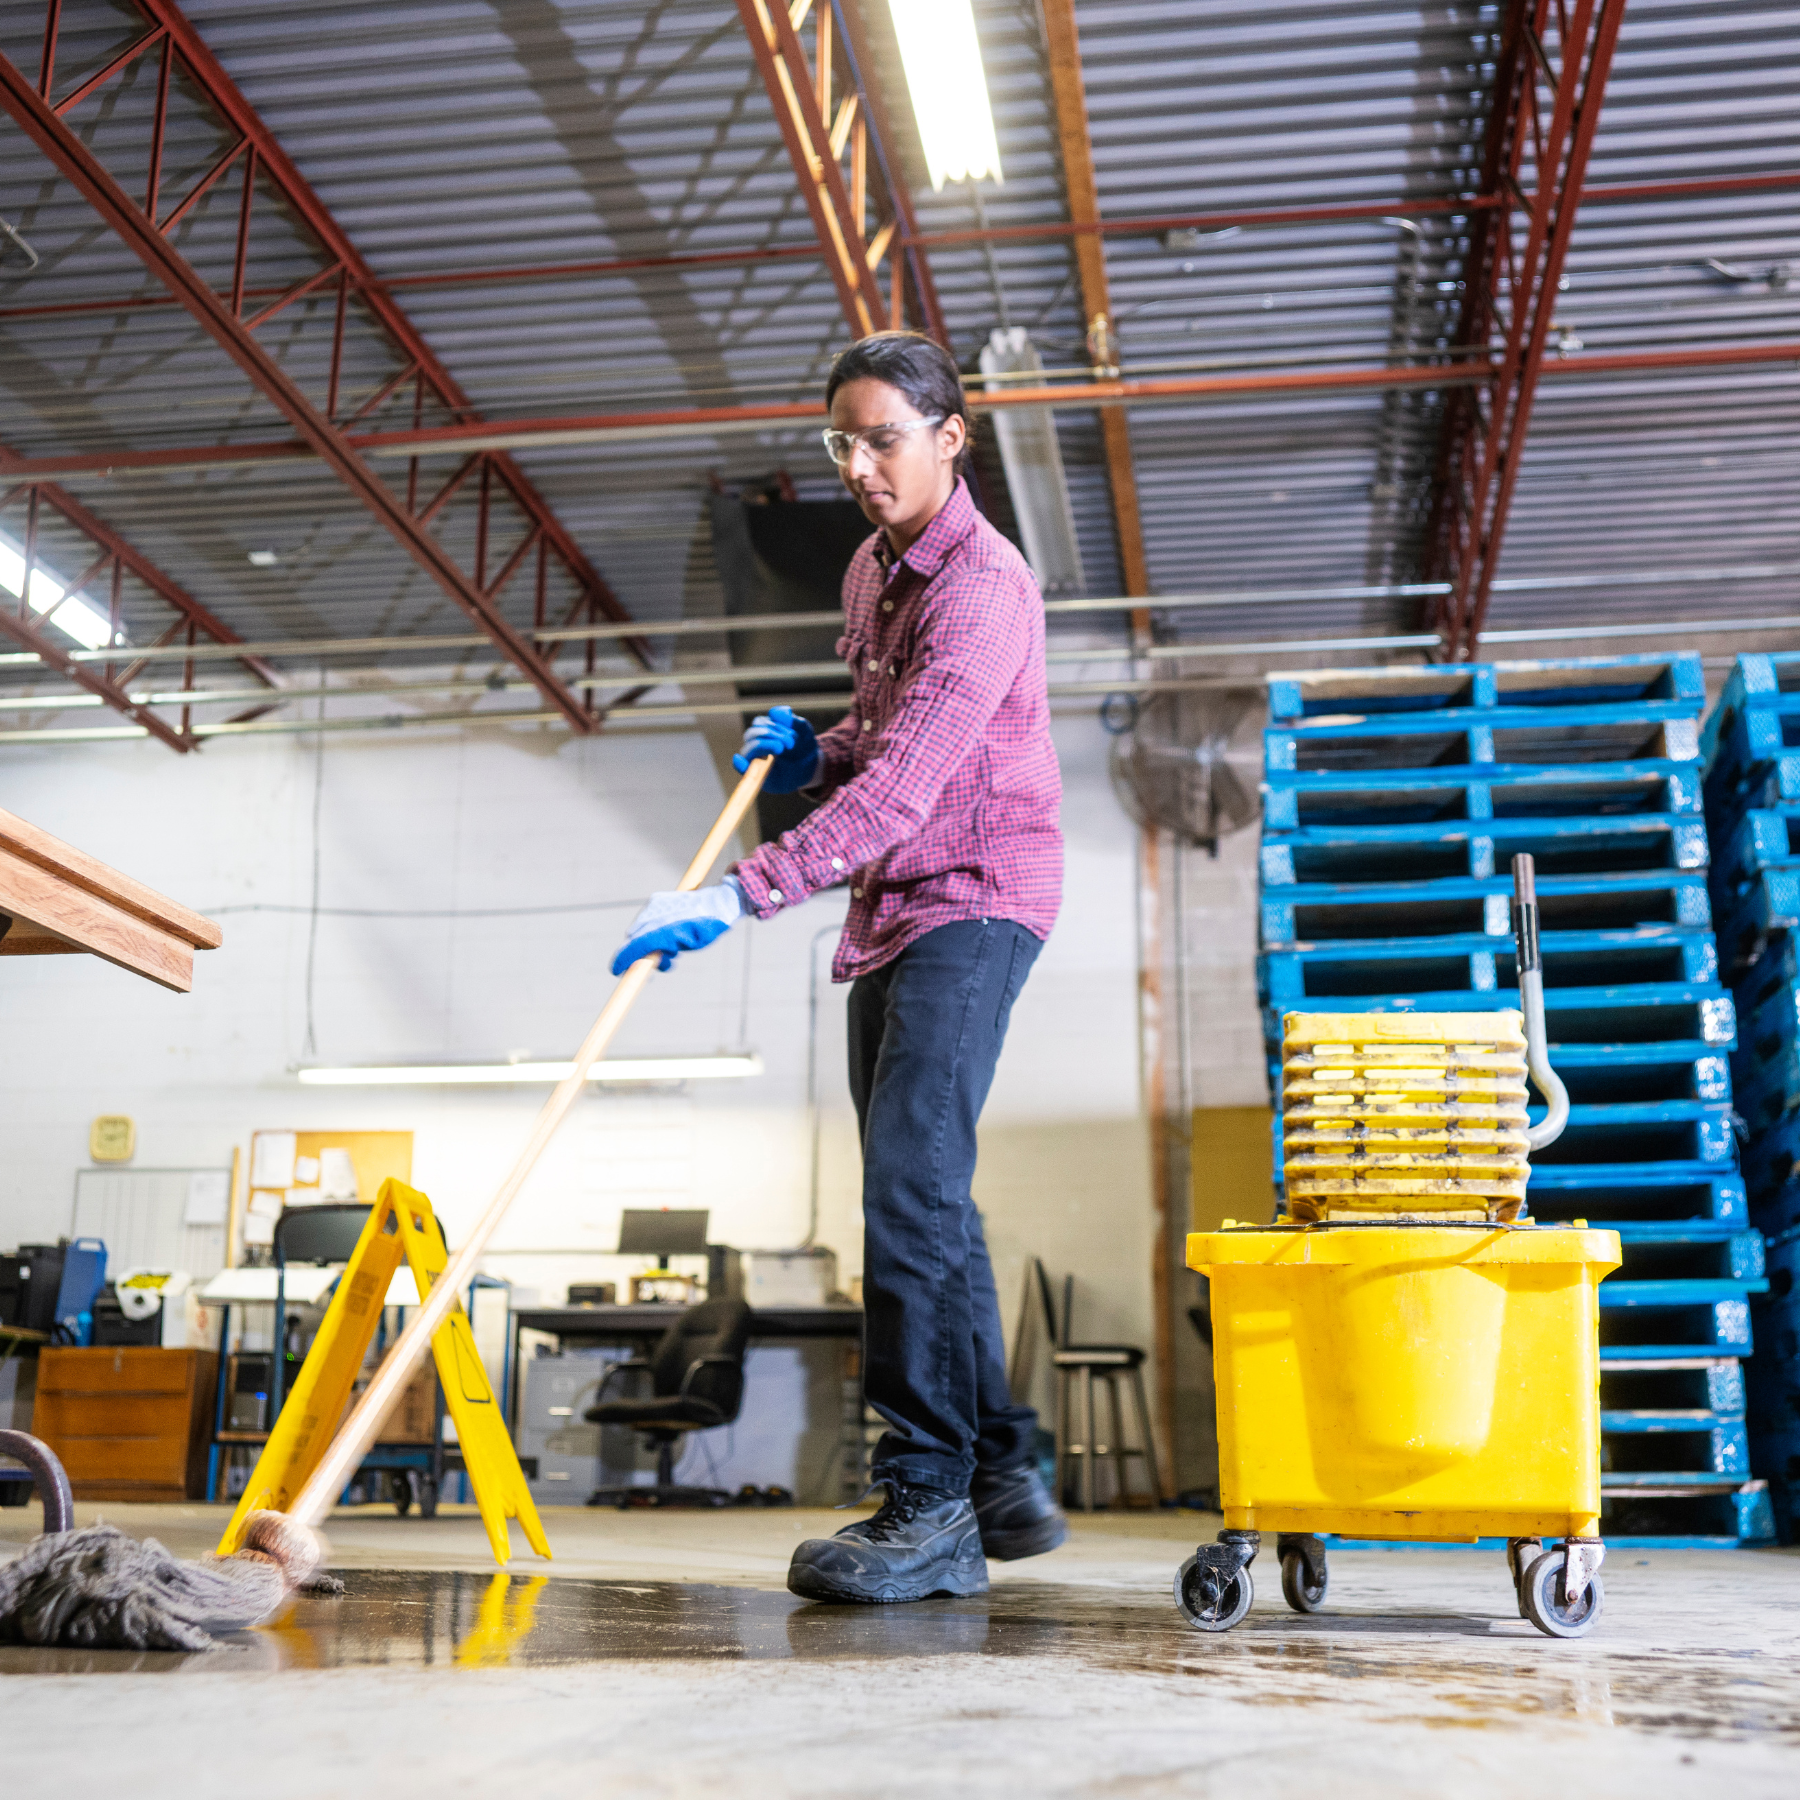 Safety in the Workplace - Cleaning Heavy Messes